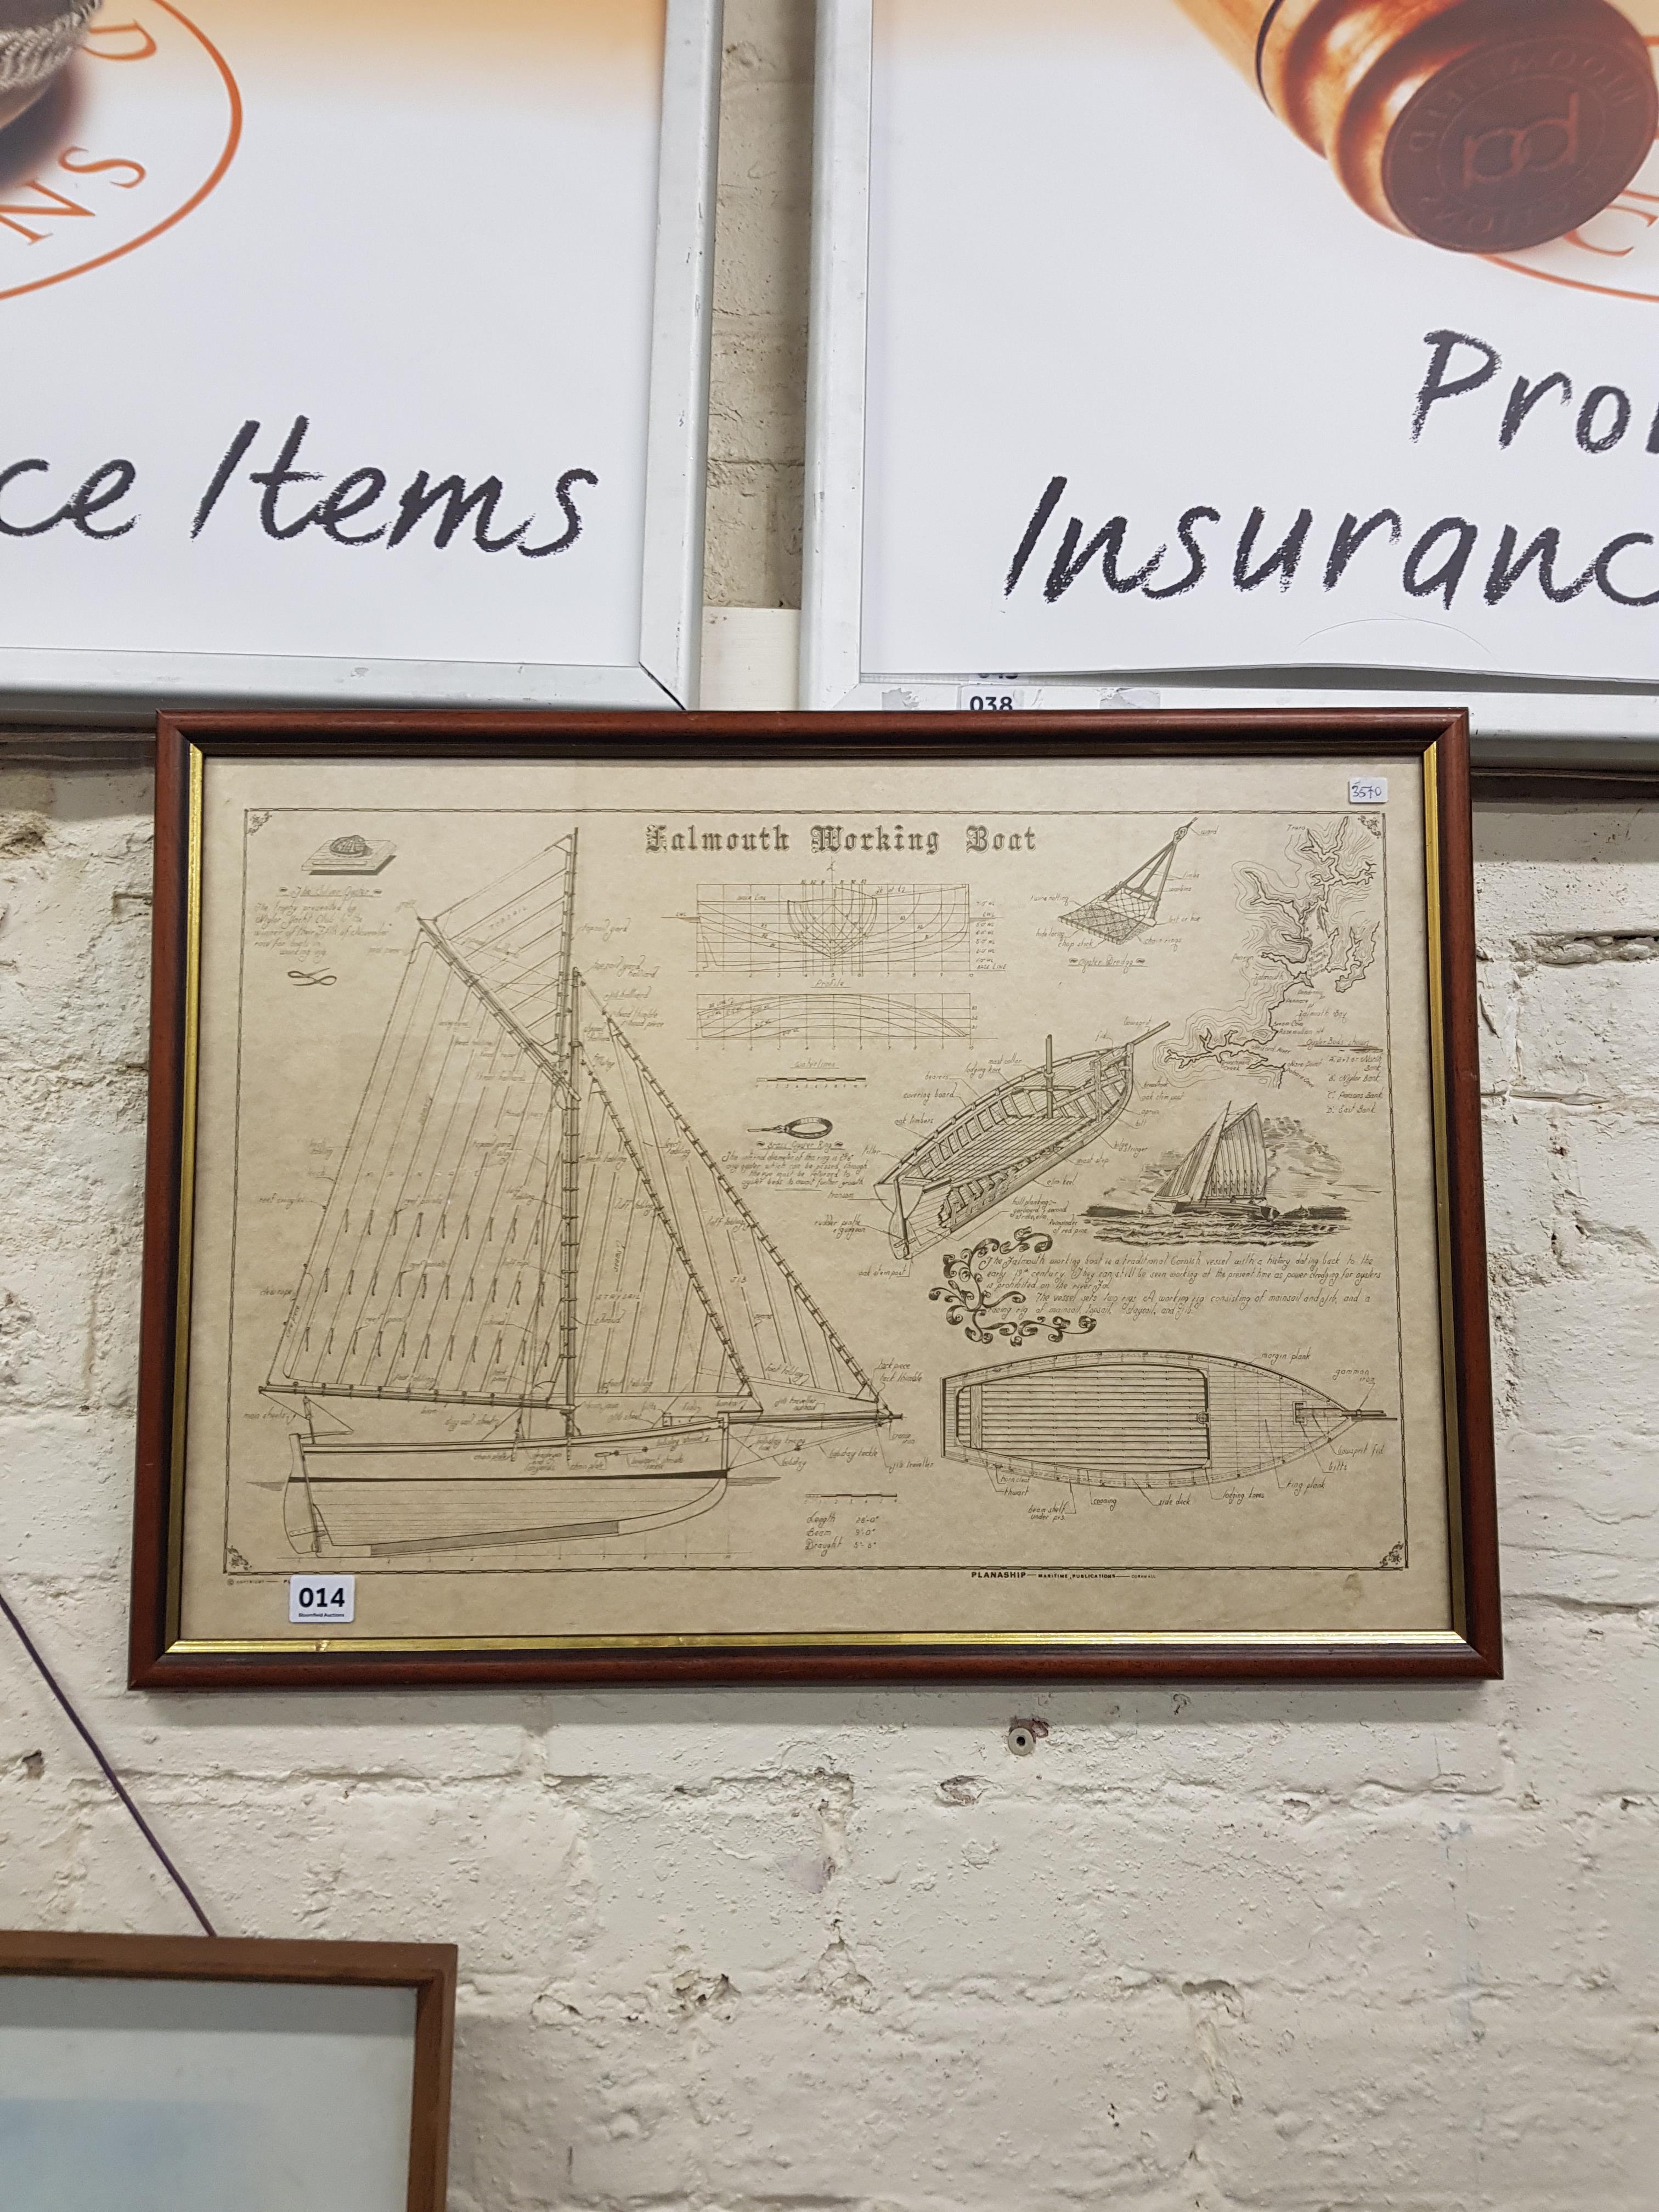 FRAMED PRINT OF A FALMOUTH WORKING BOAT